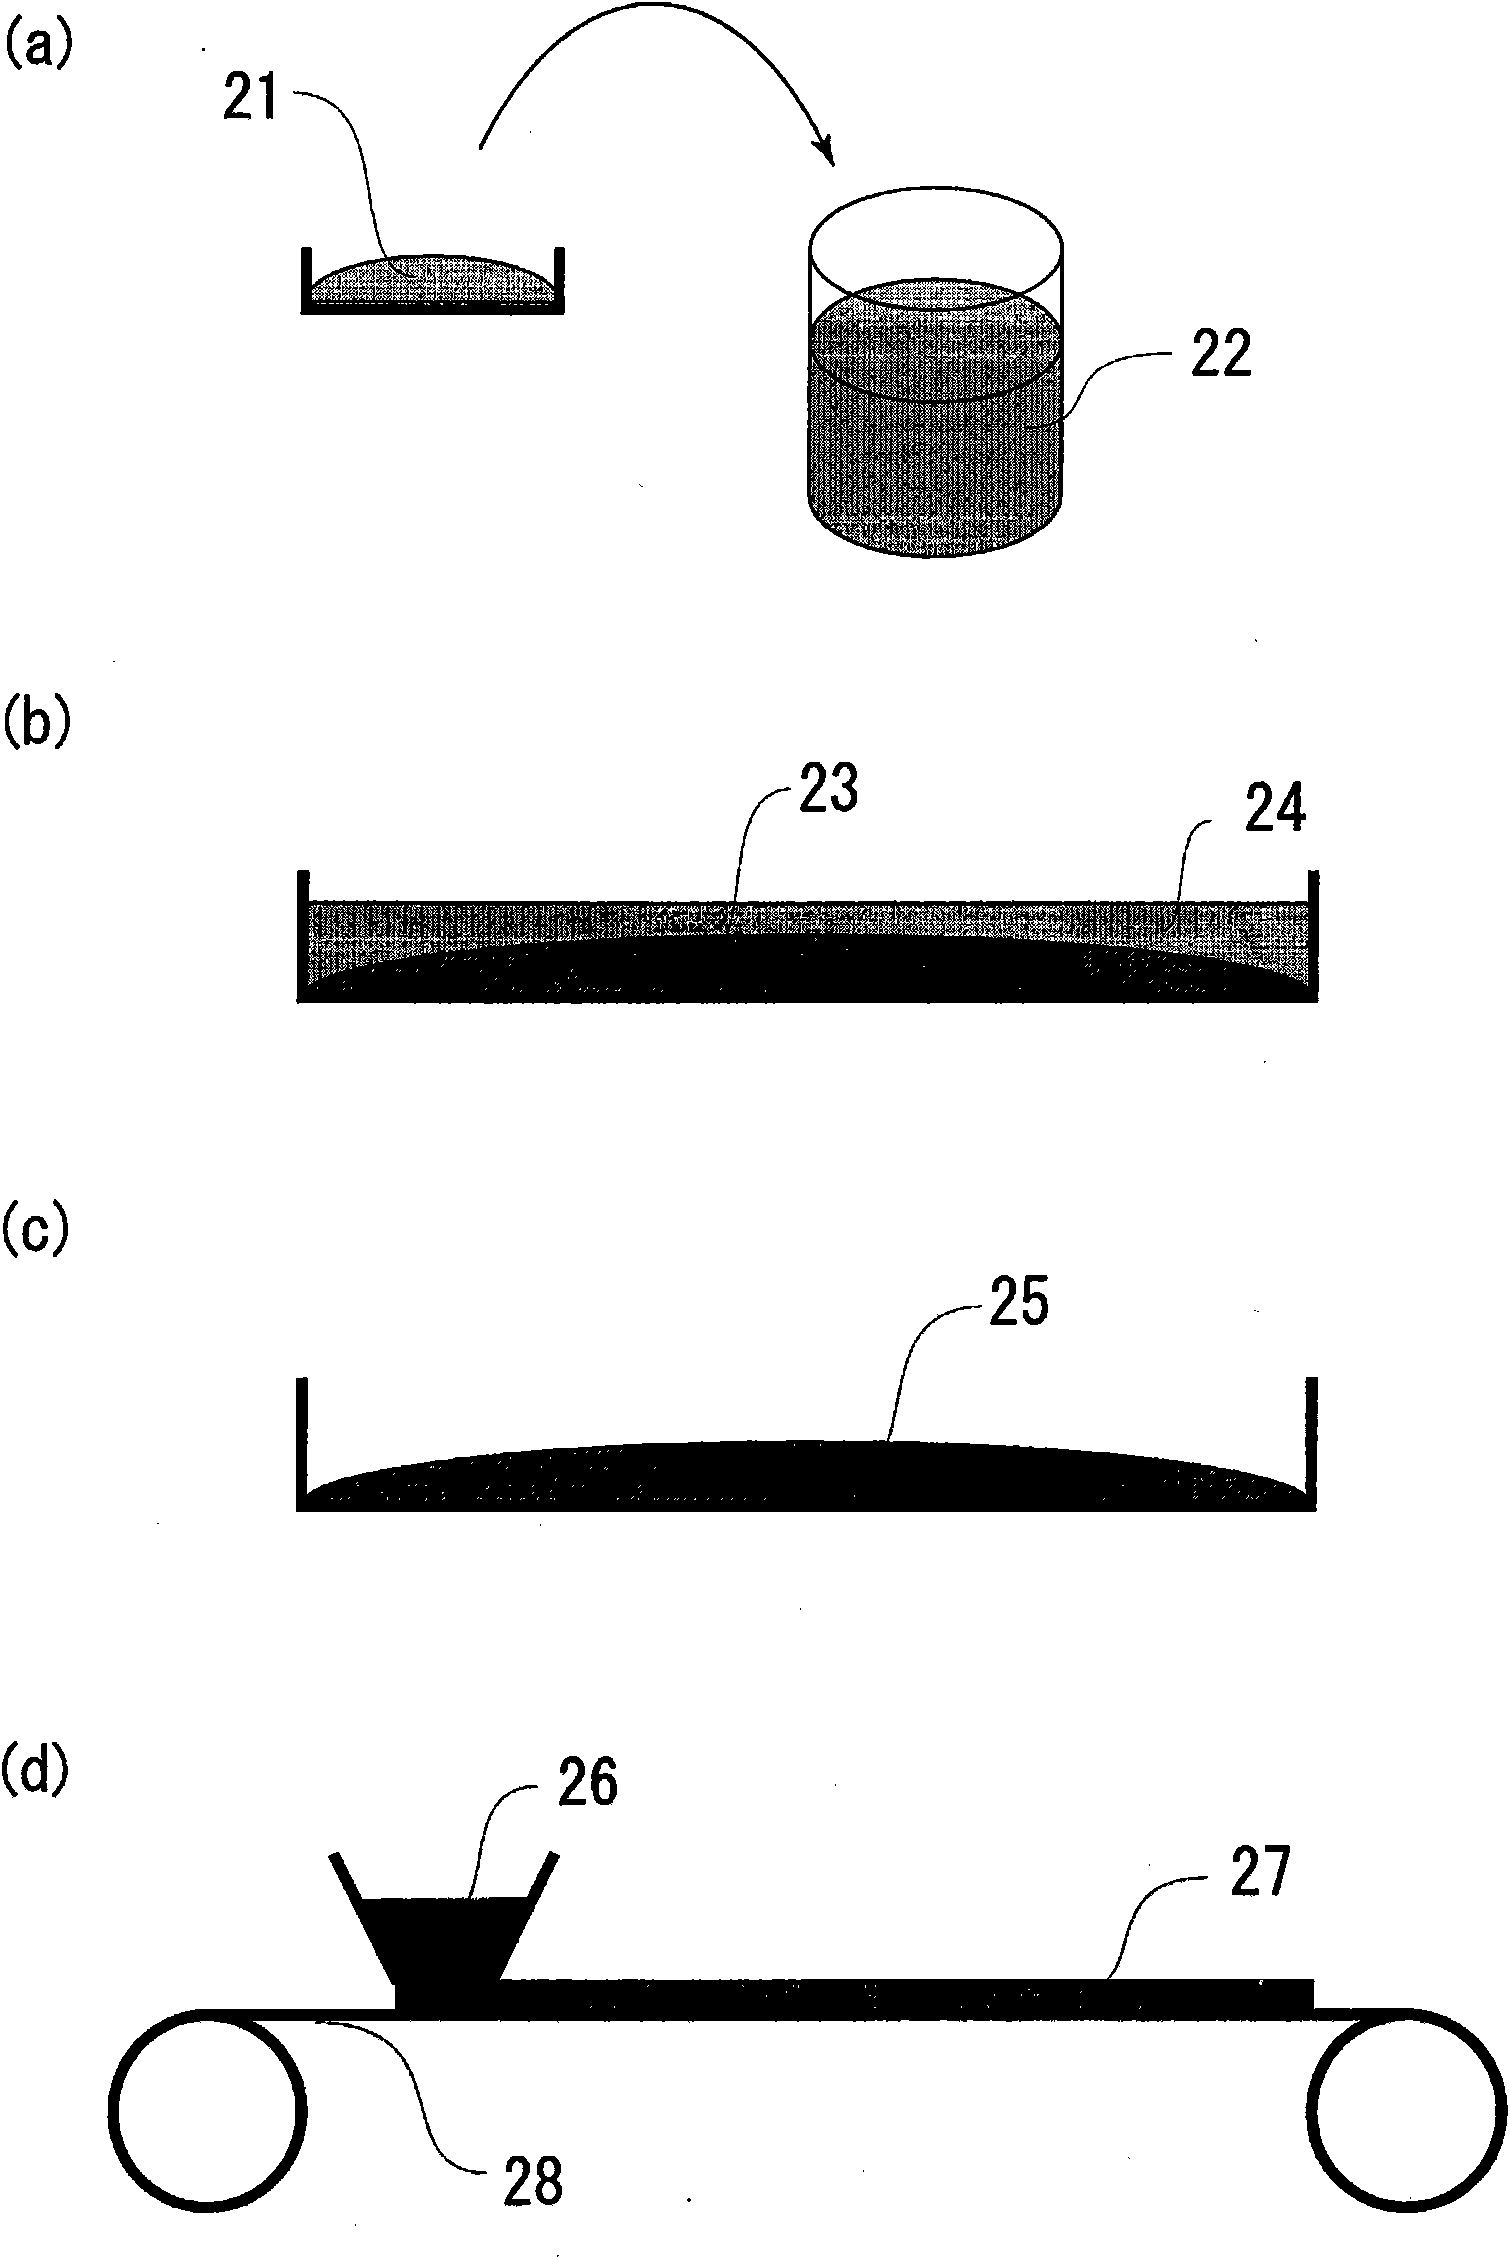 Lithium ion rechargeable battery and process for poducing the rechargeable battery